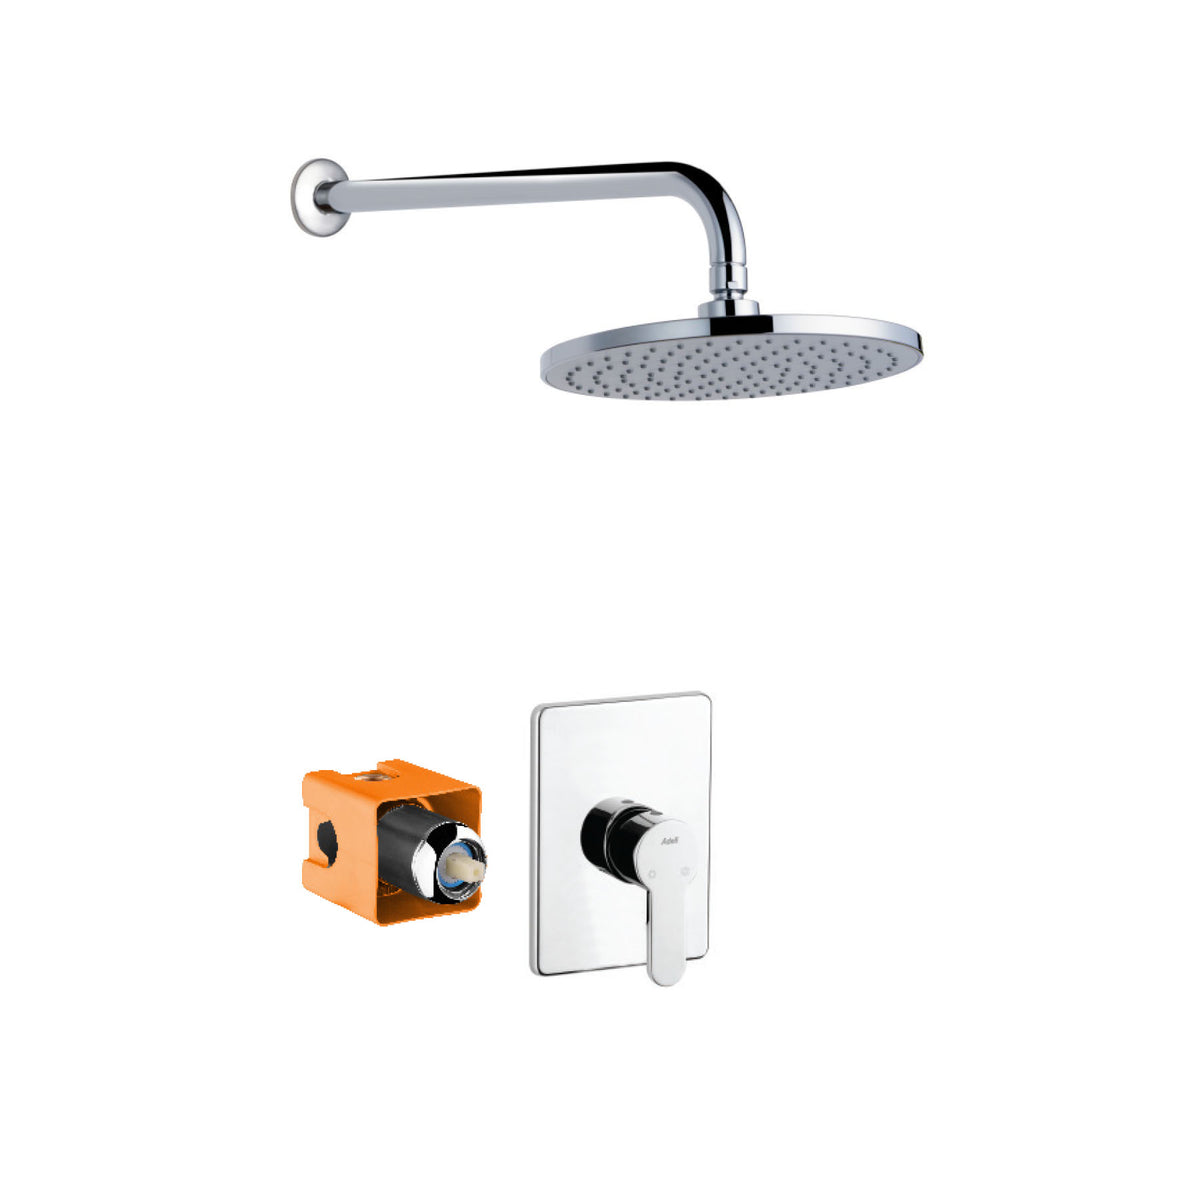 bagagerum amplifikation kanal Practical Concealed Shower Mixer Set - Faucet, Adell. — Adell.com